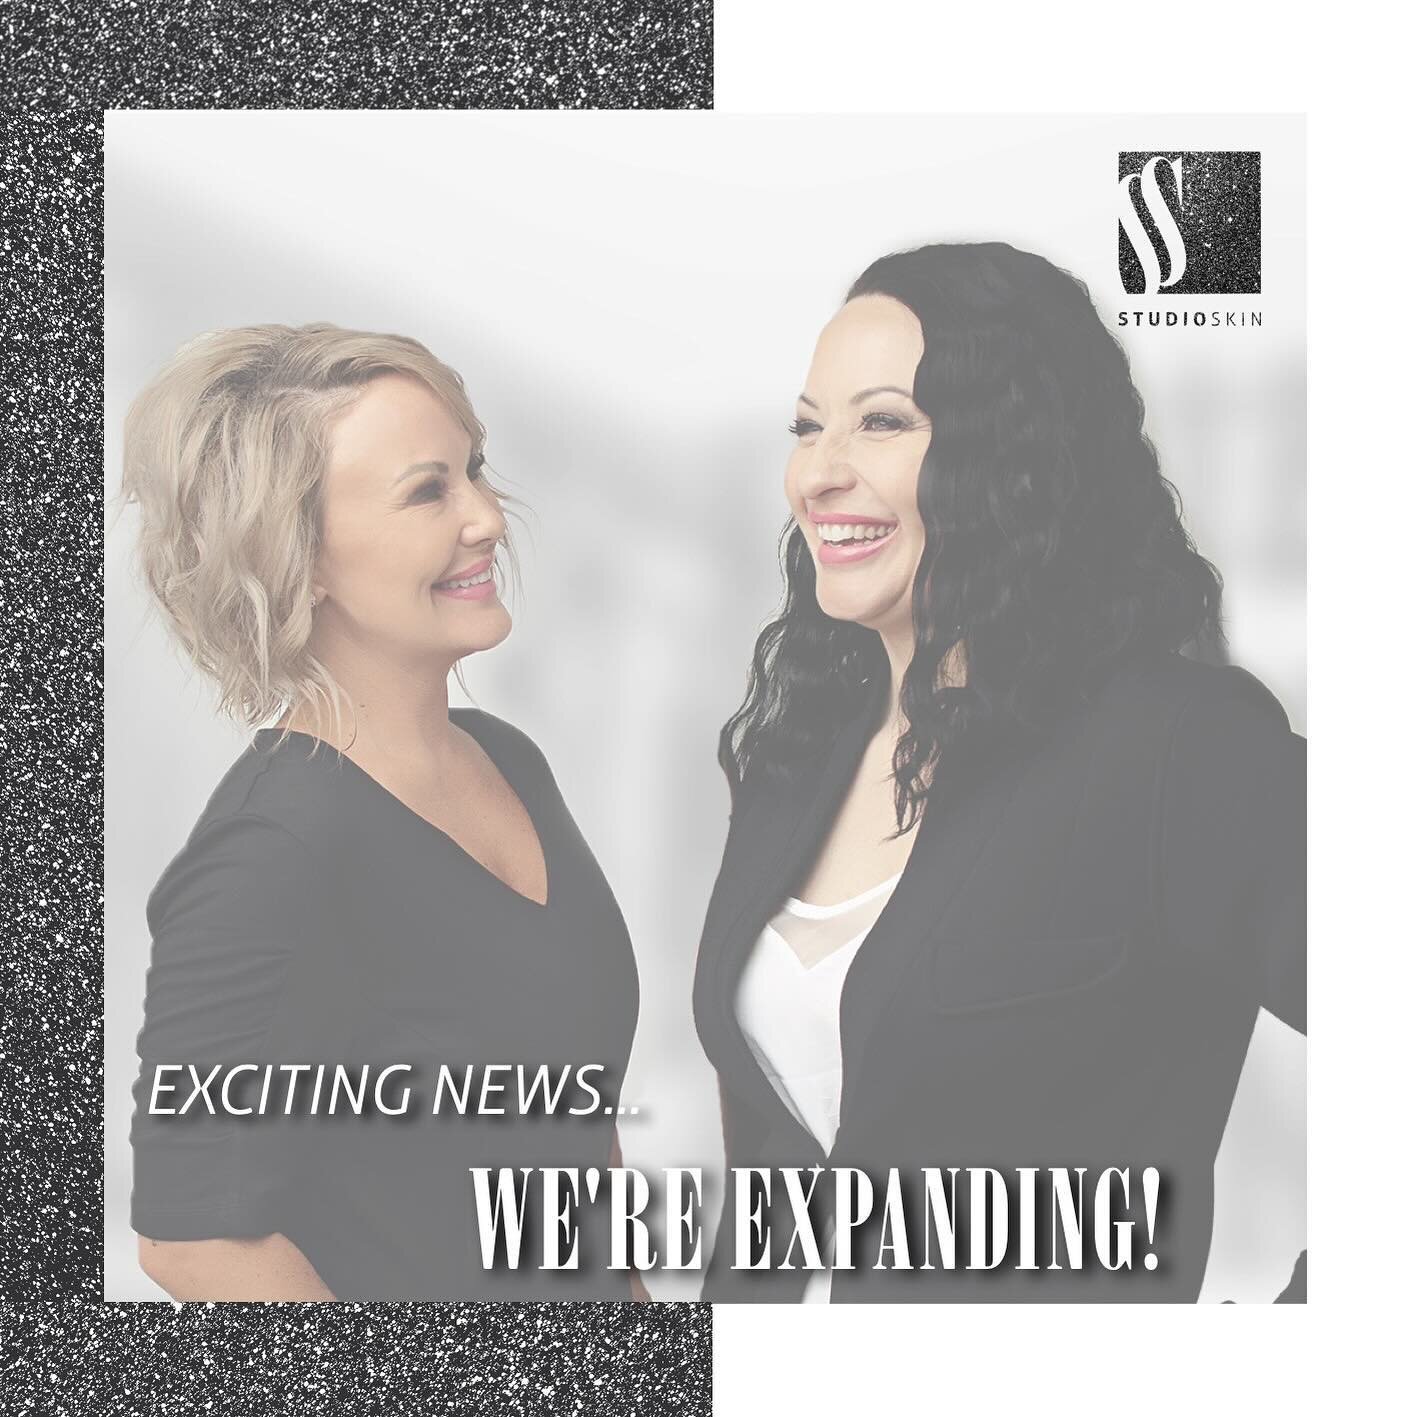 📢 Exciting news! 

Our businesses are expanding, reaching new heights and broadening our horizons. @reviveiv.regina IV Therapy will be joining our team! With this growth, we&rsquo;re poised to serve even more customers and make a greater impact in o